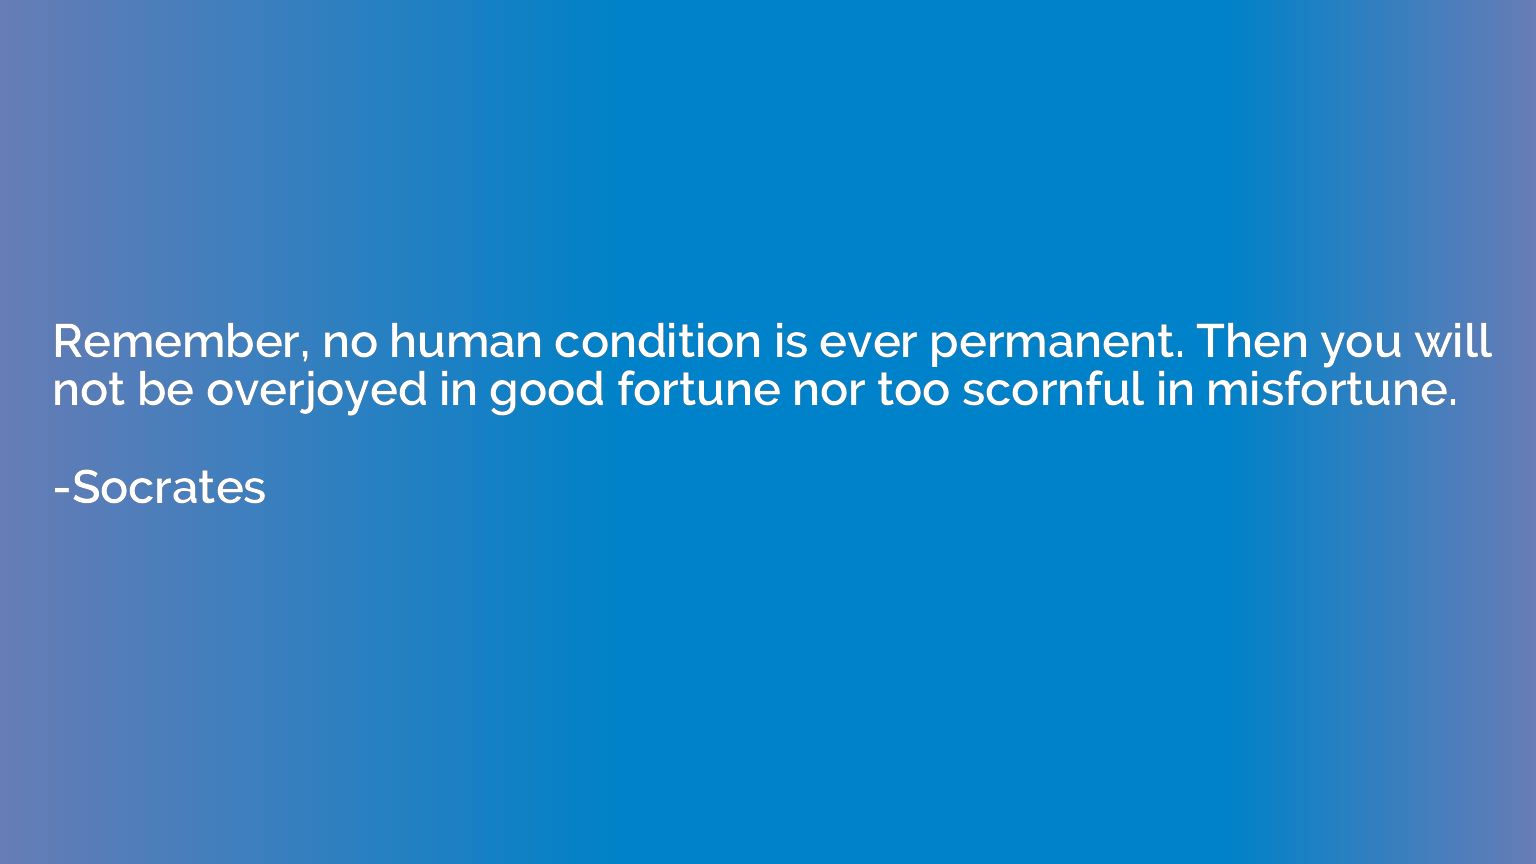 Remember, no human condition is ever permanent. Then you wil